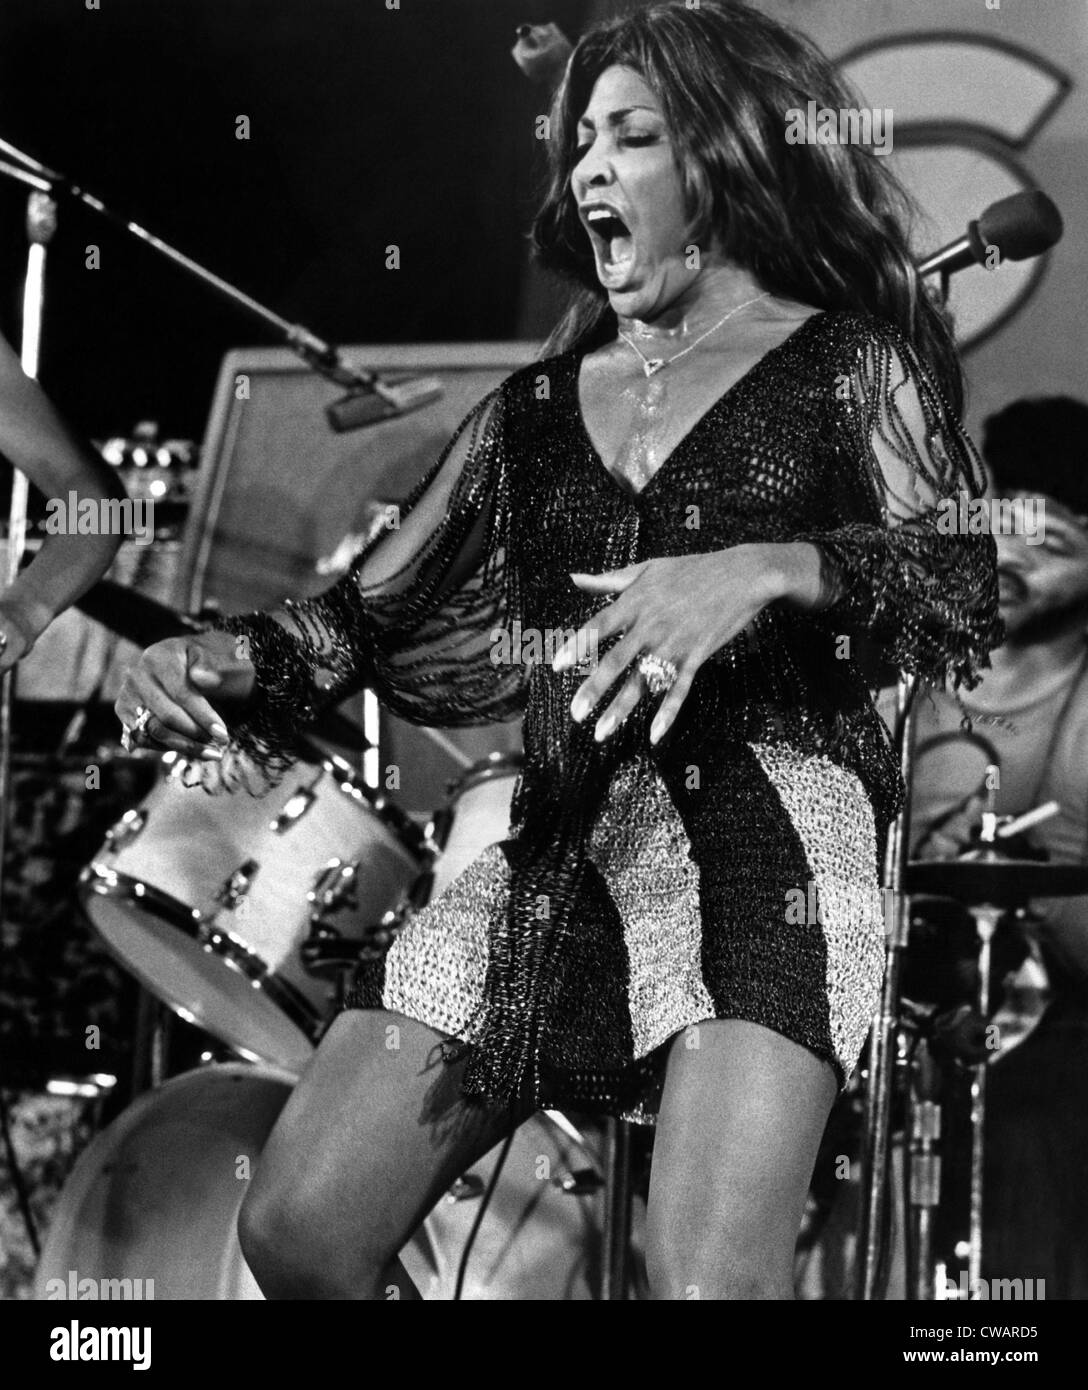 SOUL TO SOUL, Tina Turner, 1971.. Courtesy: CSU Archives / Everett Collection Stock Photo